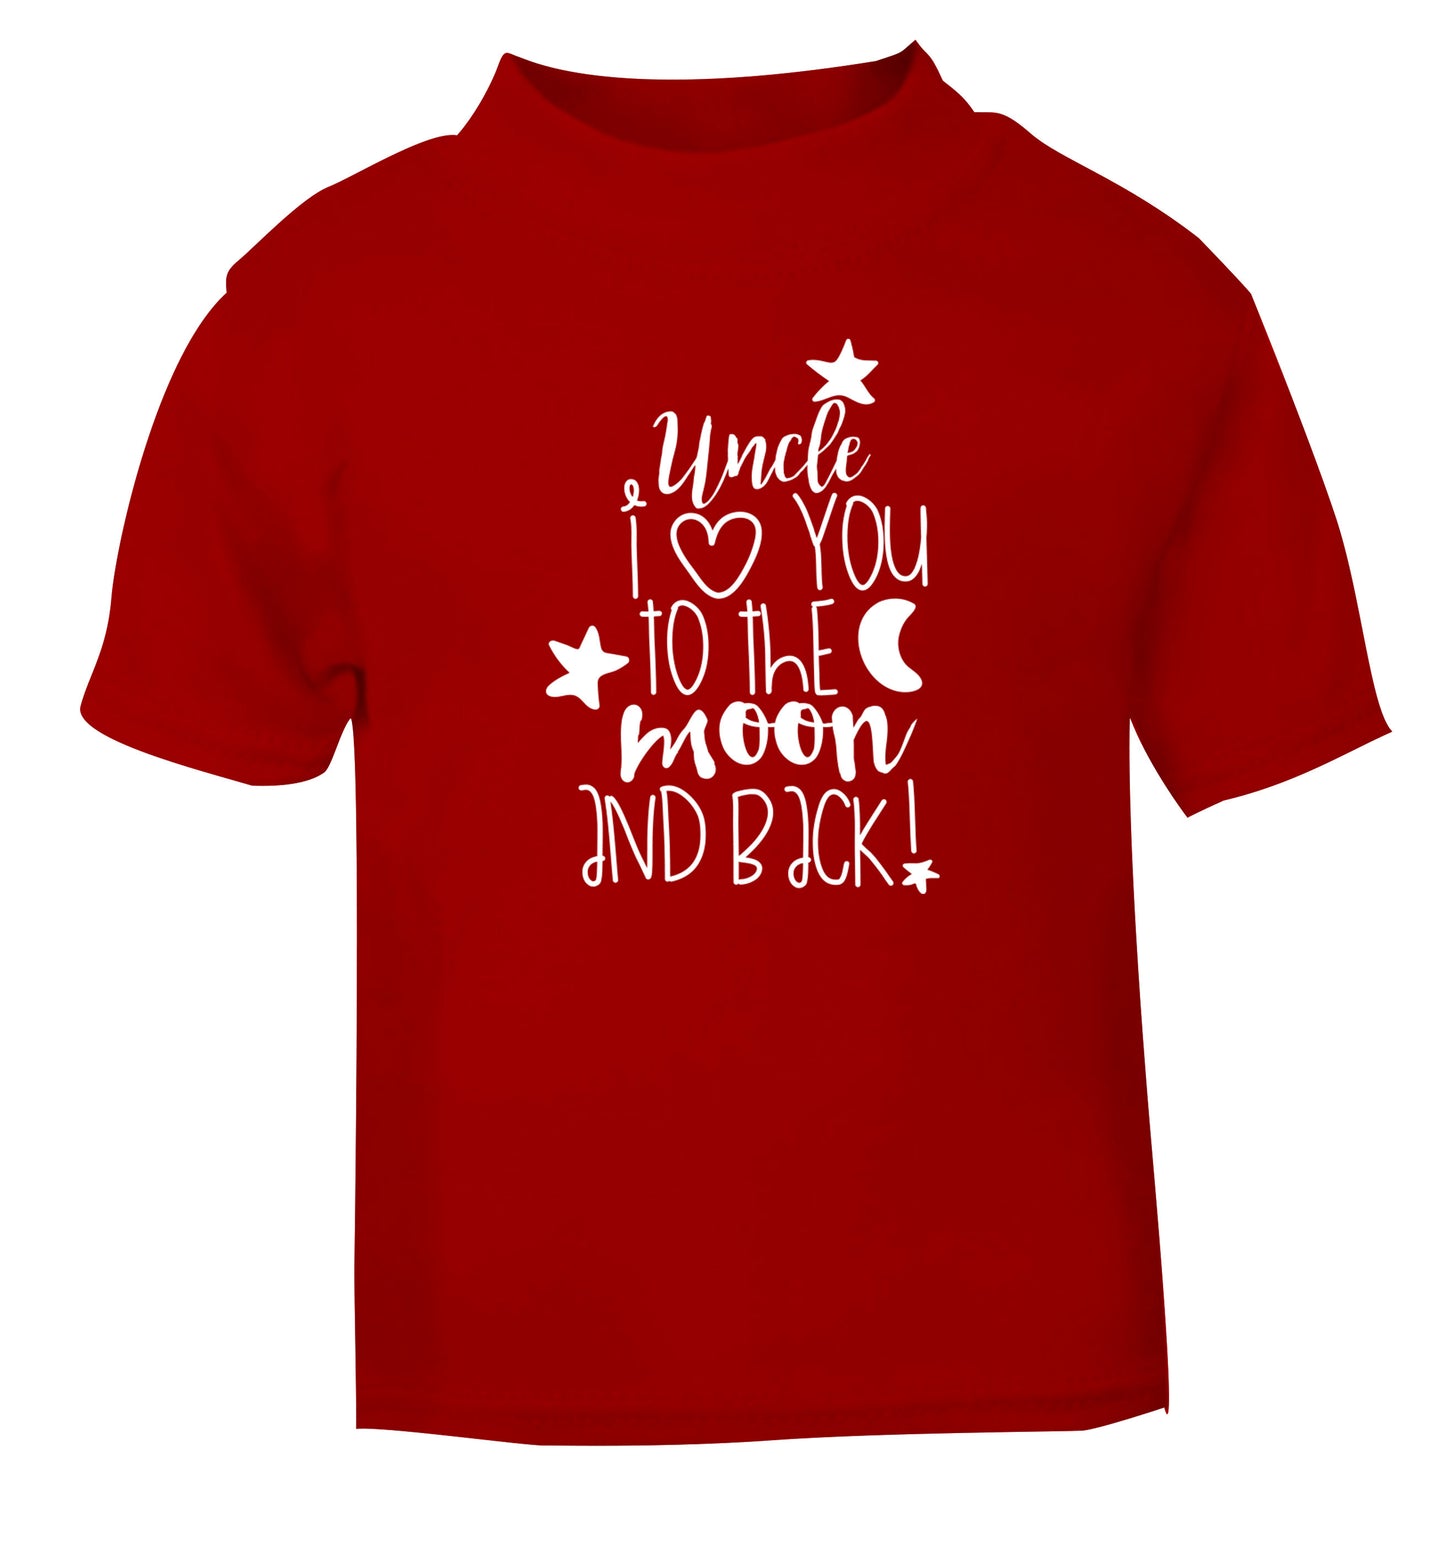 Uncle I love you to the moon and back red Baby Toddler Tshirt 2 Years